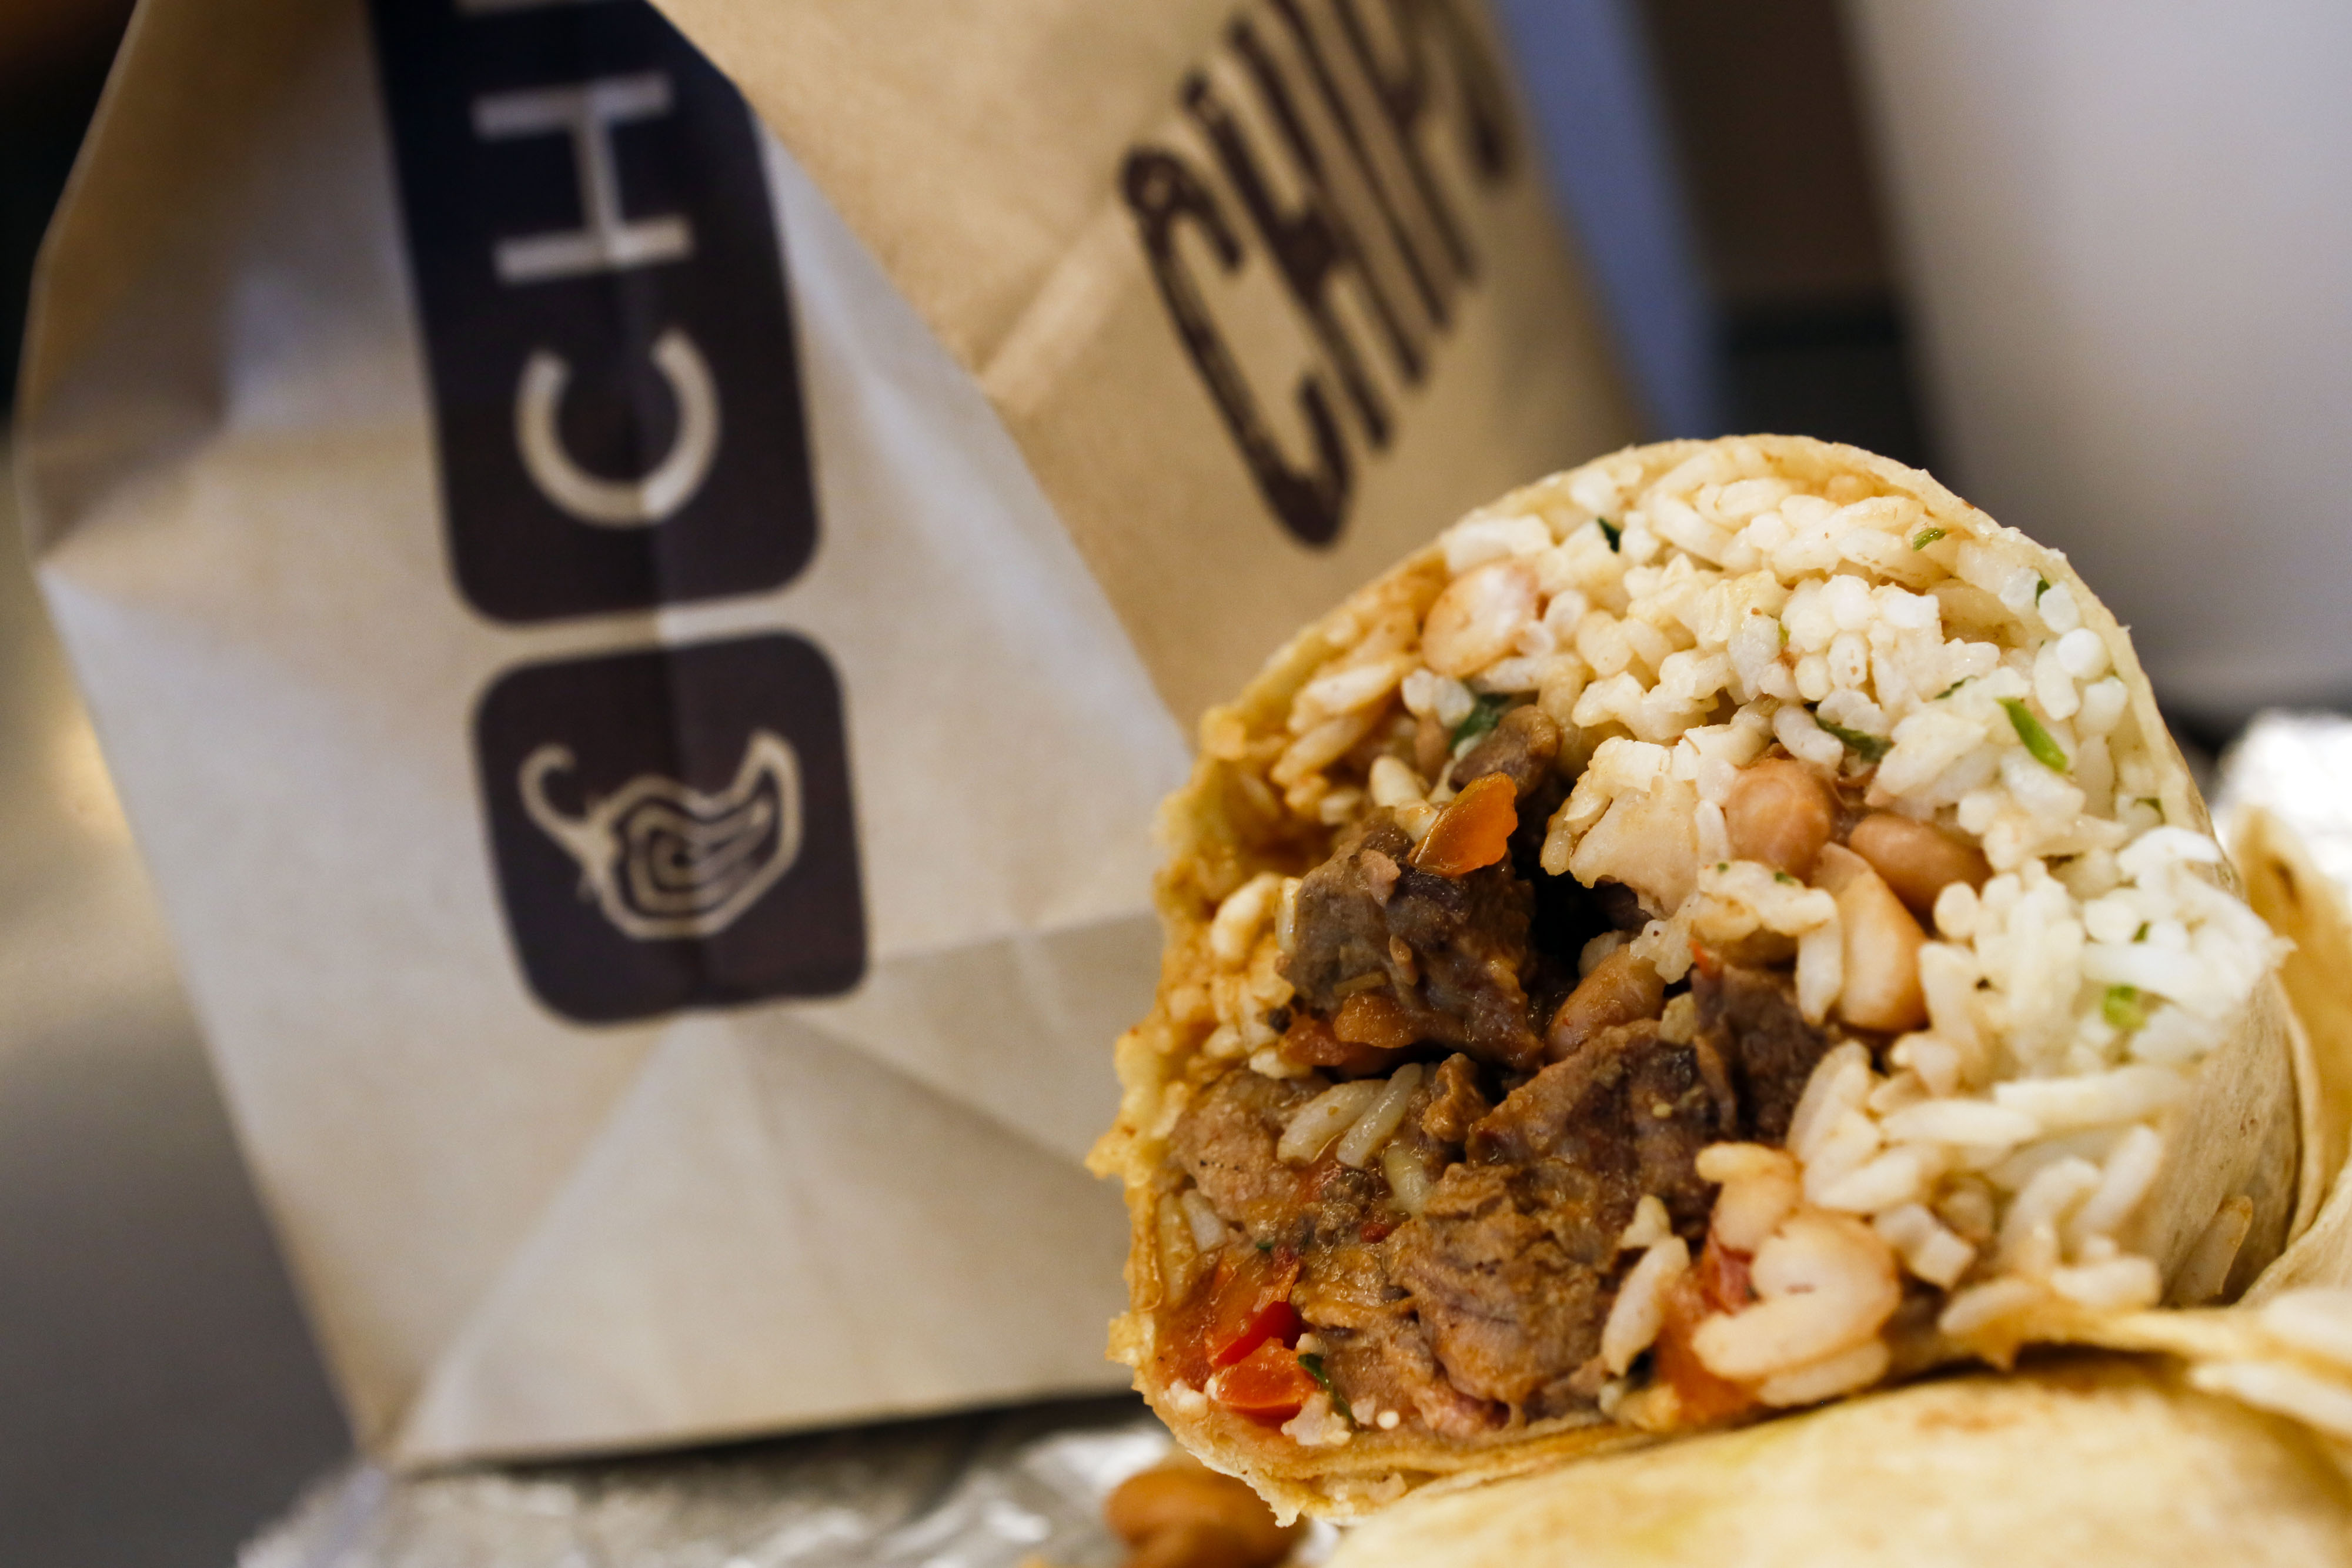 Chipotle Burritos: People Underestimate Calorie Count | Time